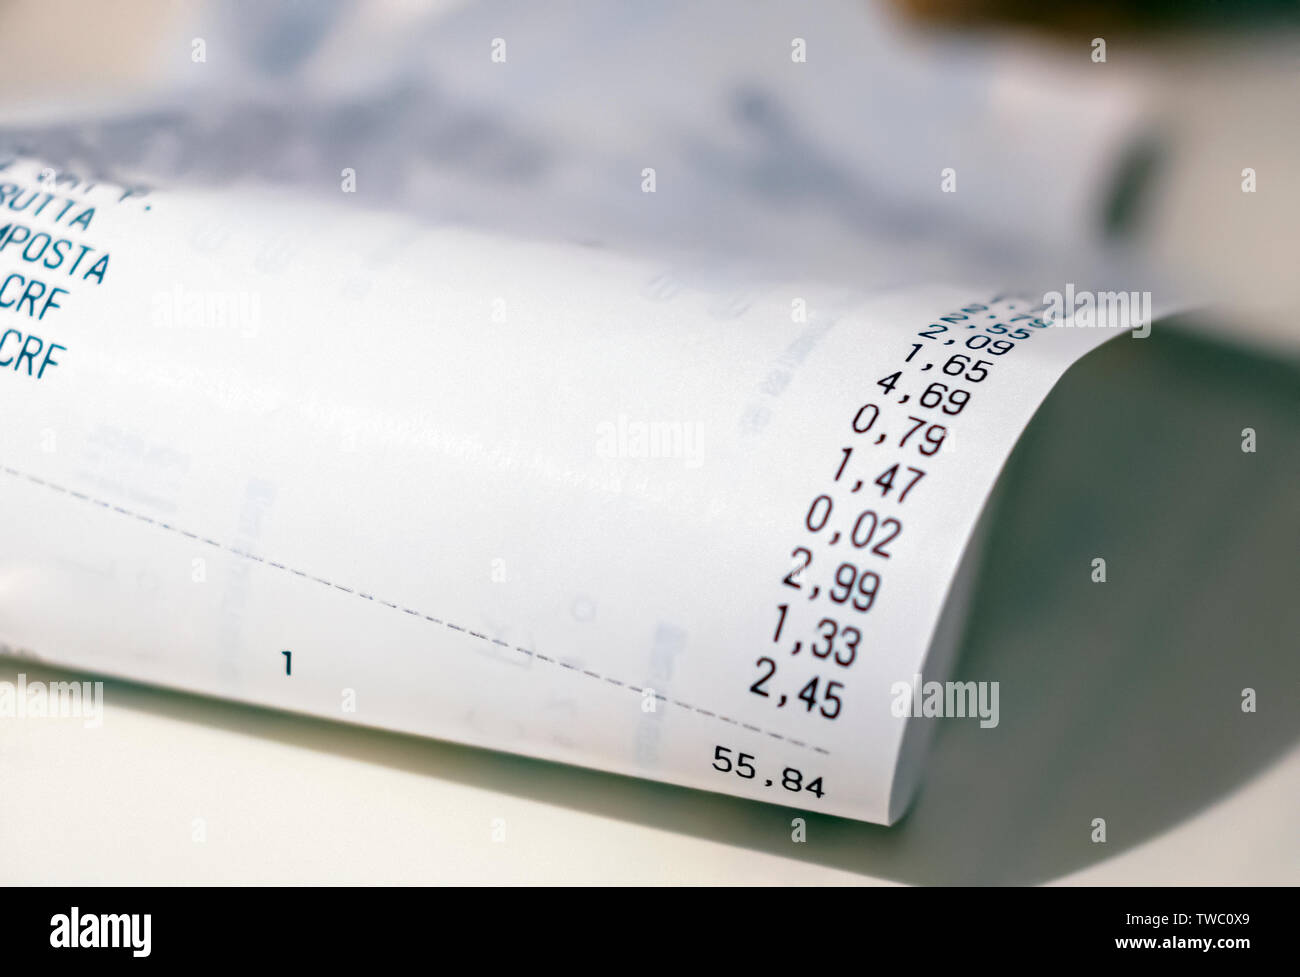 Close-up view of the total amount of supermarket grocery shopping printed on a paper receipt. Grocery shopping list Stock Photo